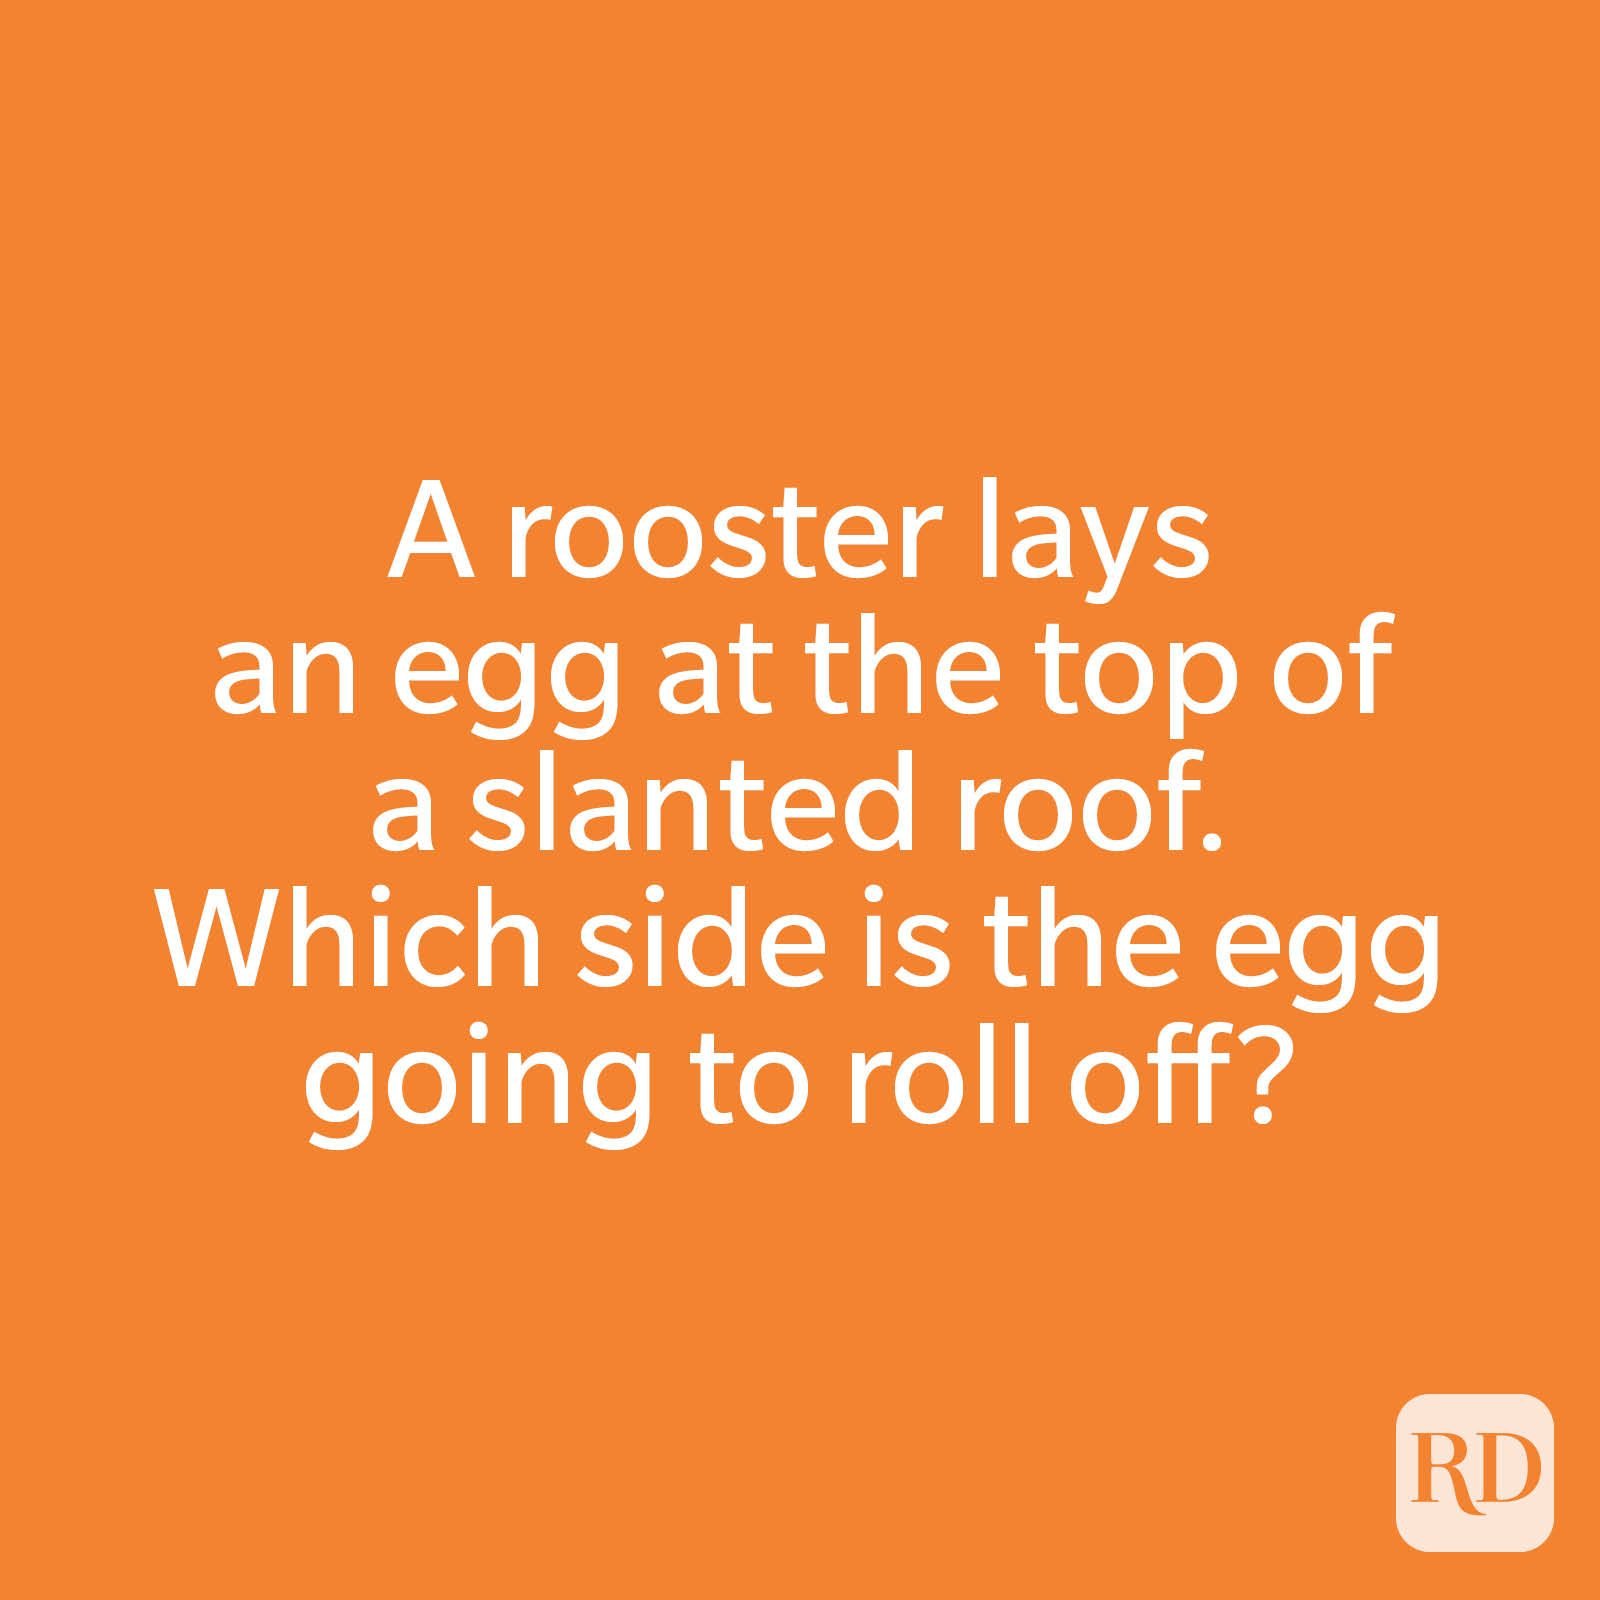 A rooster lays an egg at the top of a slanted roof. Which side is the egg going to roll off?